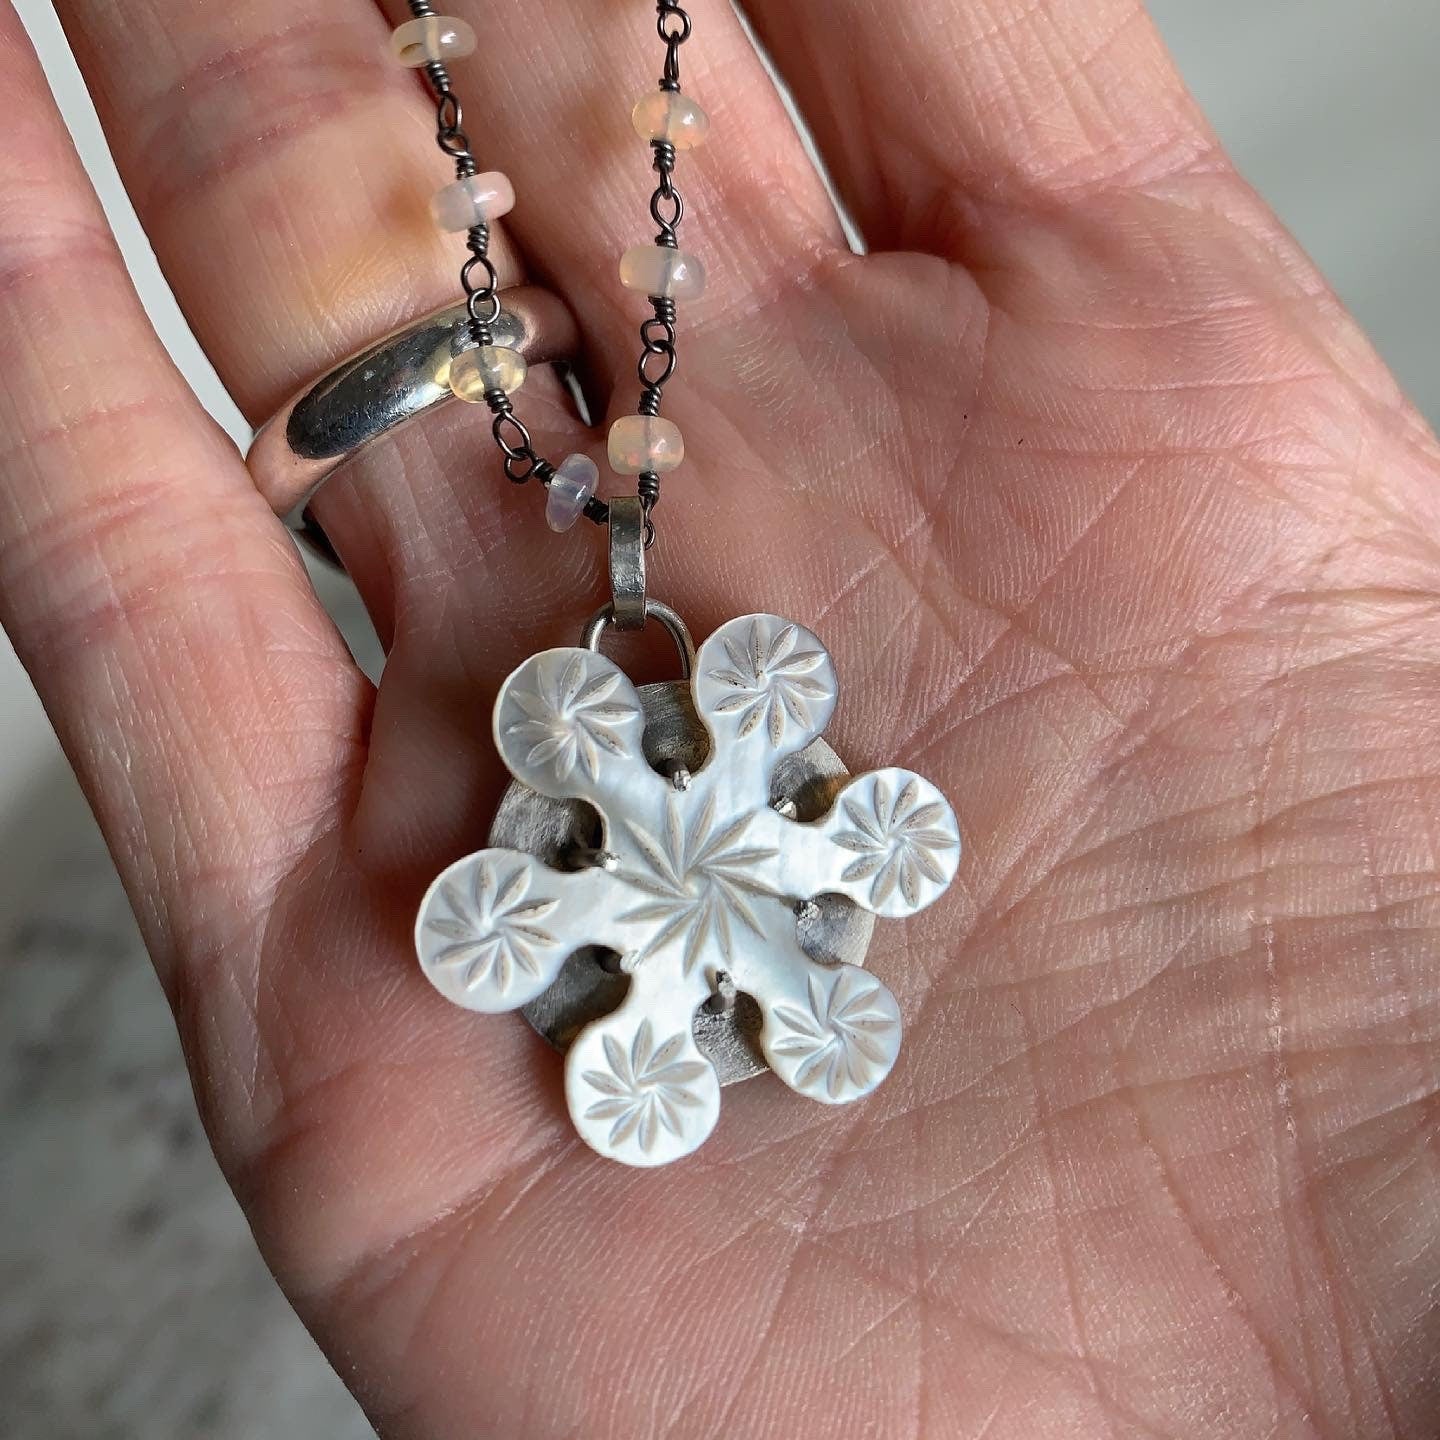 Mother of pearl flower pendant necklace - feminine statement necklace with an opal bead chain - spring jewelry - womens boho floral